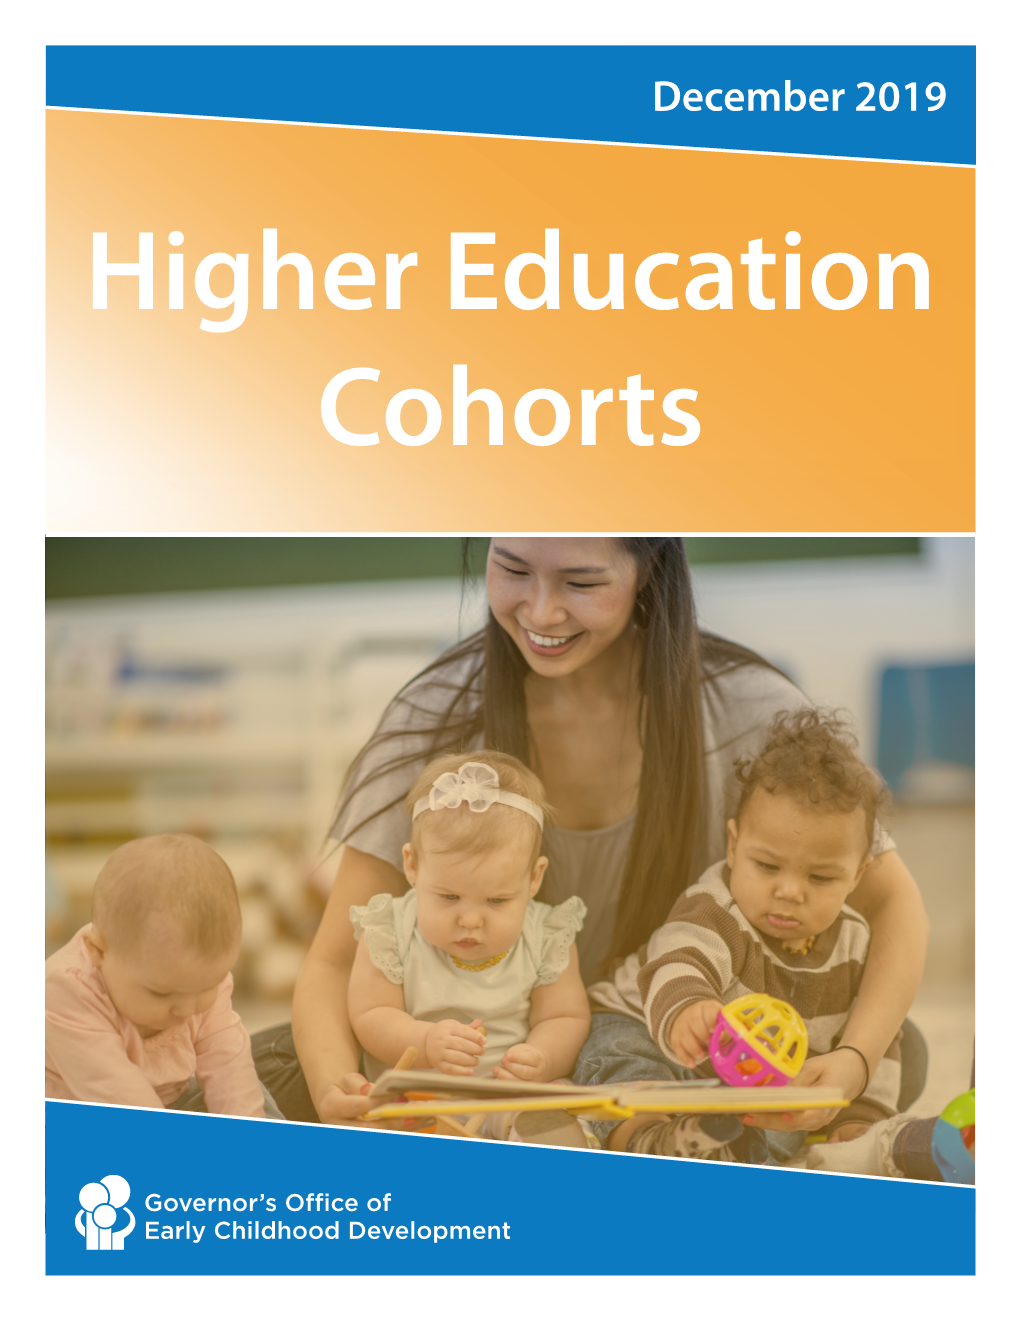 Higher Education Cohorts Report